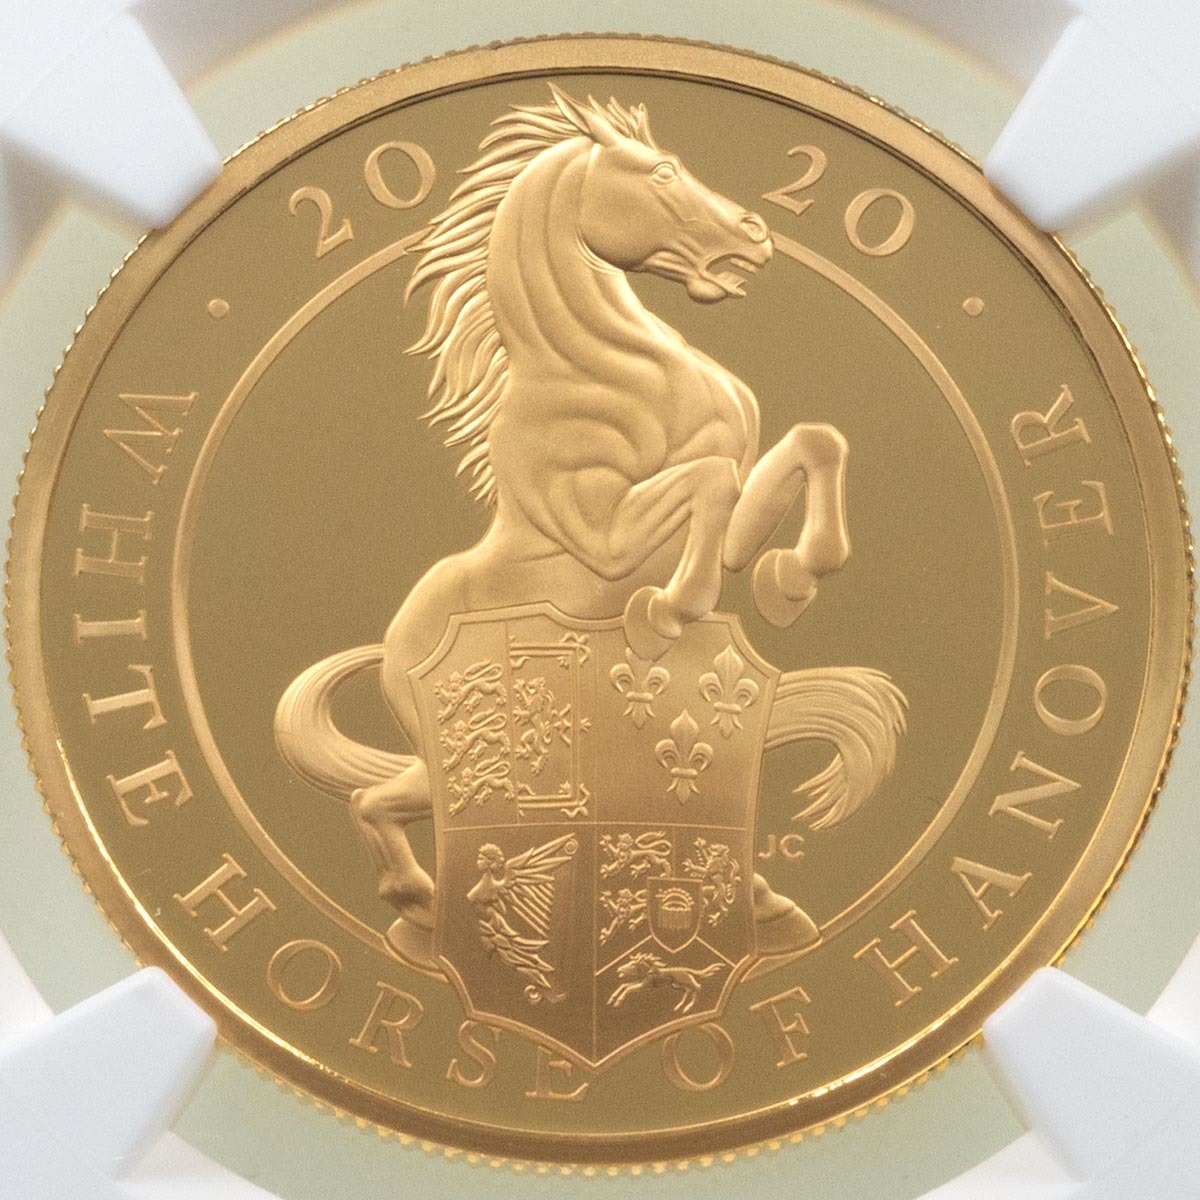 UK20QHGP 2020 Queen's Beasts White Horse Of Hanover One Ounce Gold Proof Coin NGC Graded PF 69 Ultra Cameo Reverse